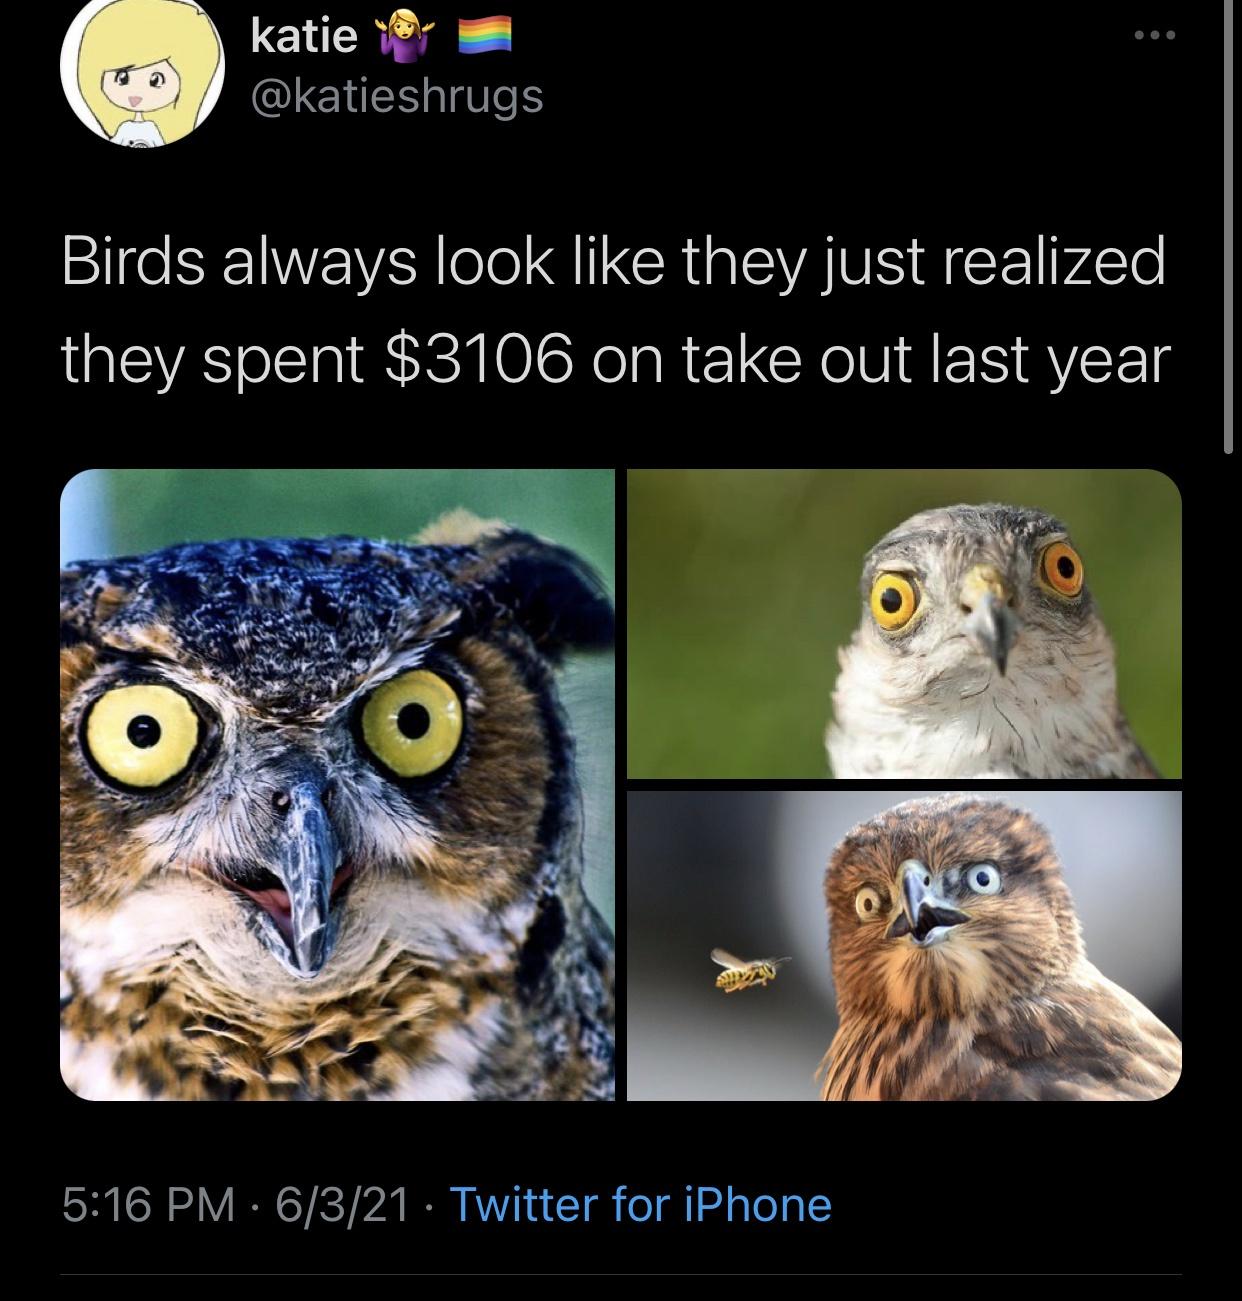 owl - katie Birds always look they just realized they spent $3106 on take out last year 6321 Twitter for iPhone